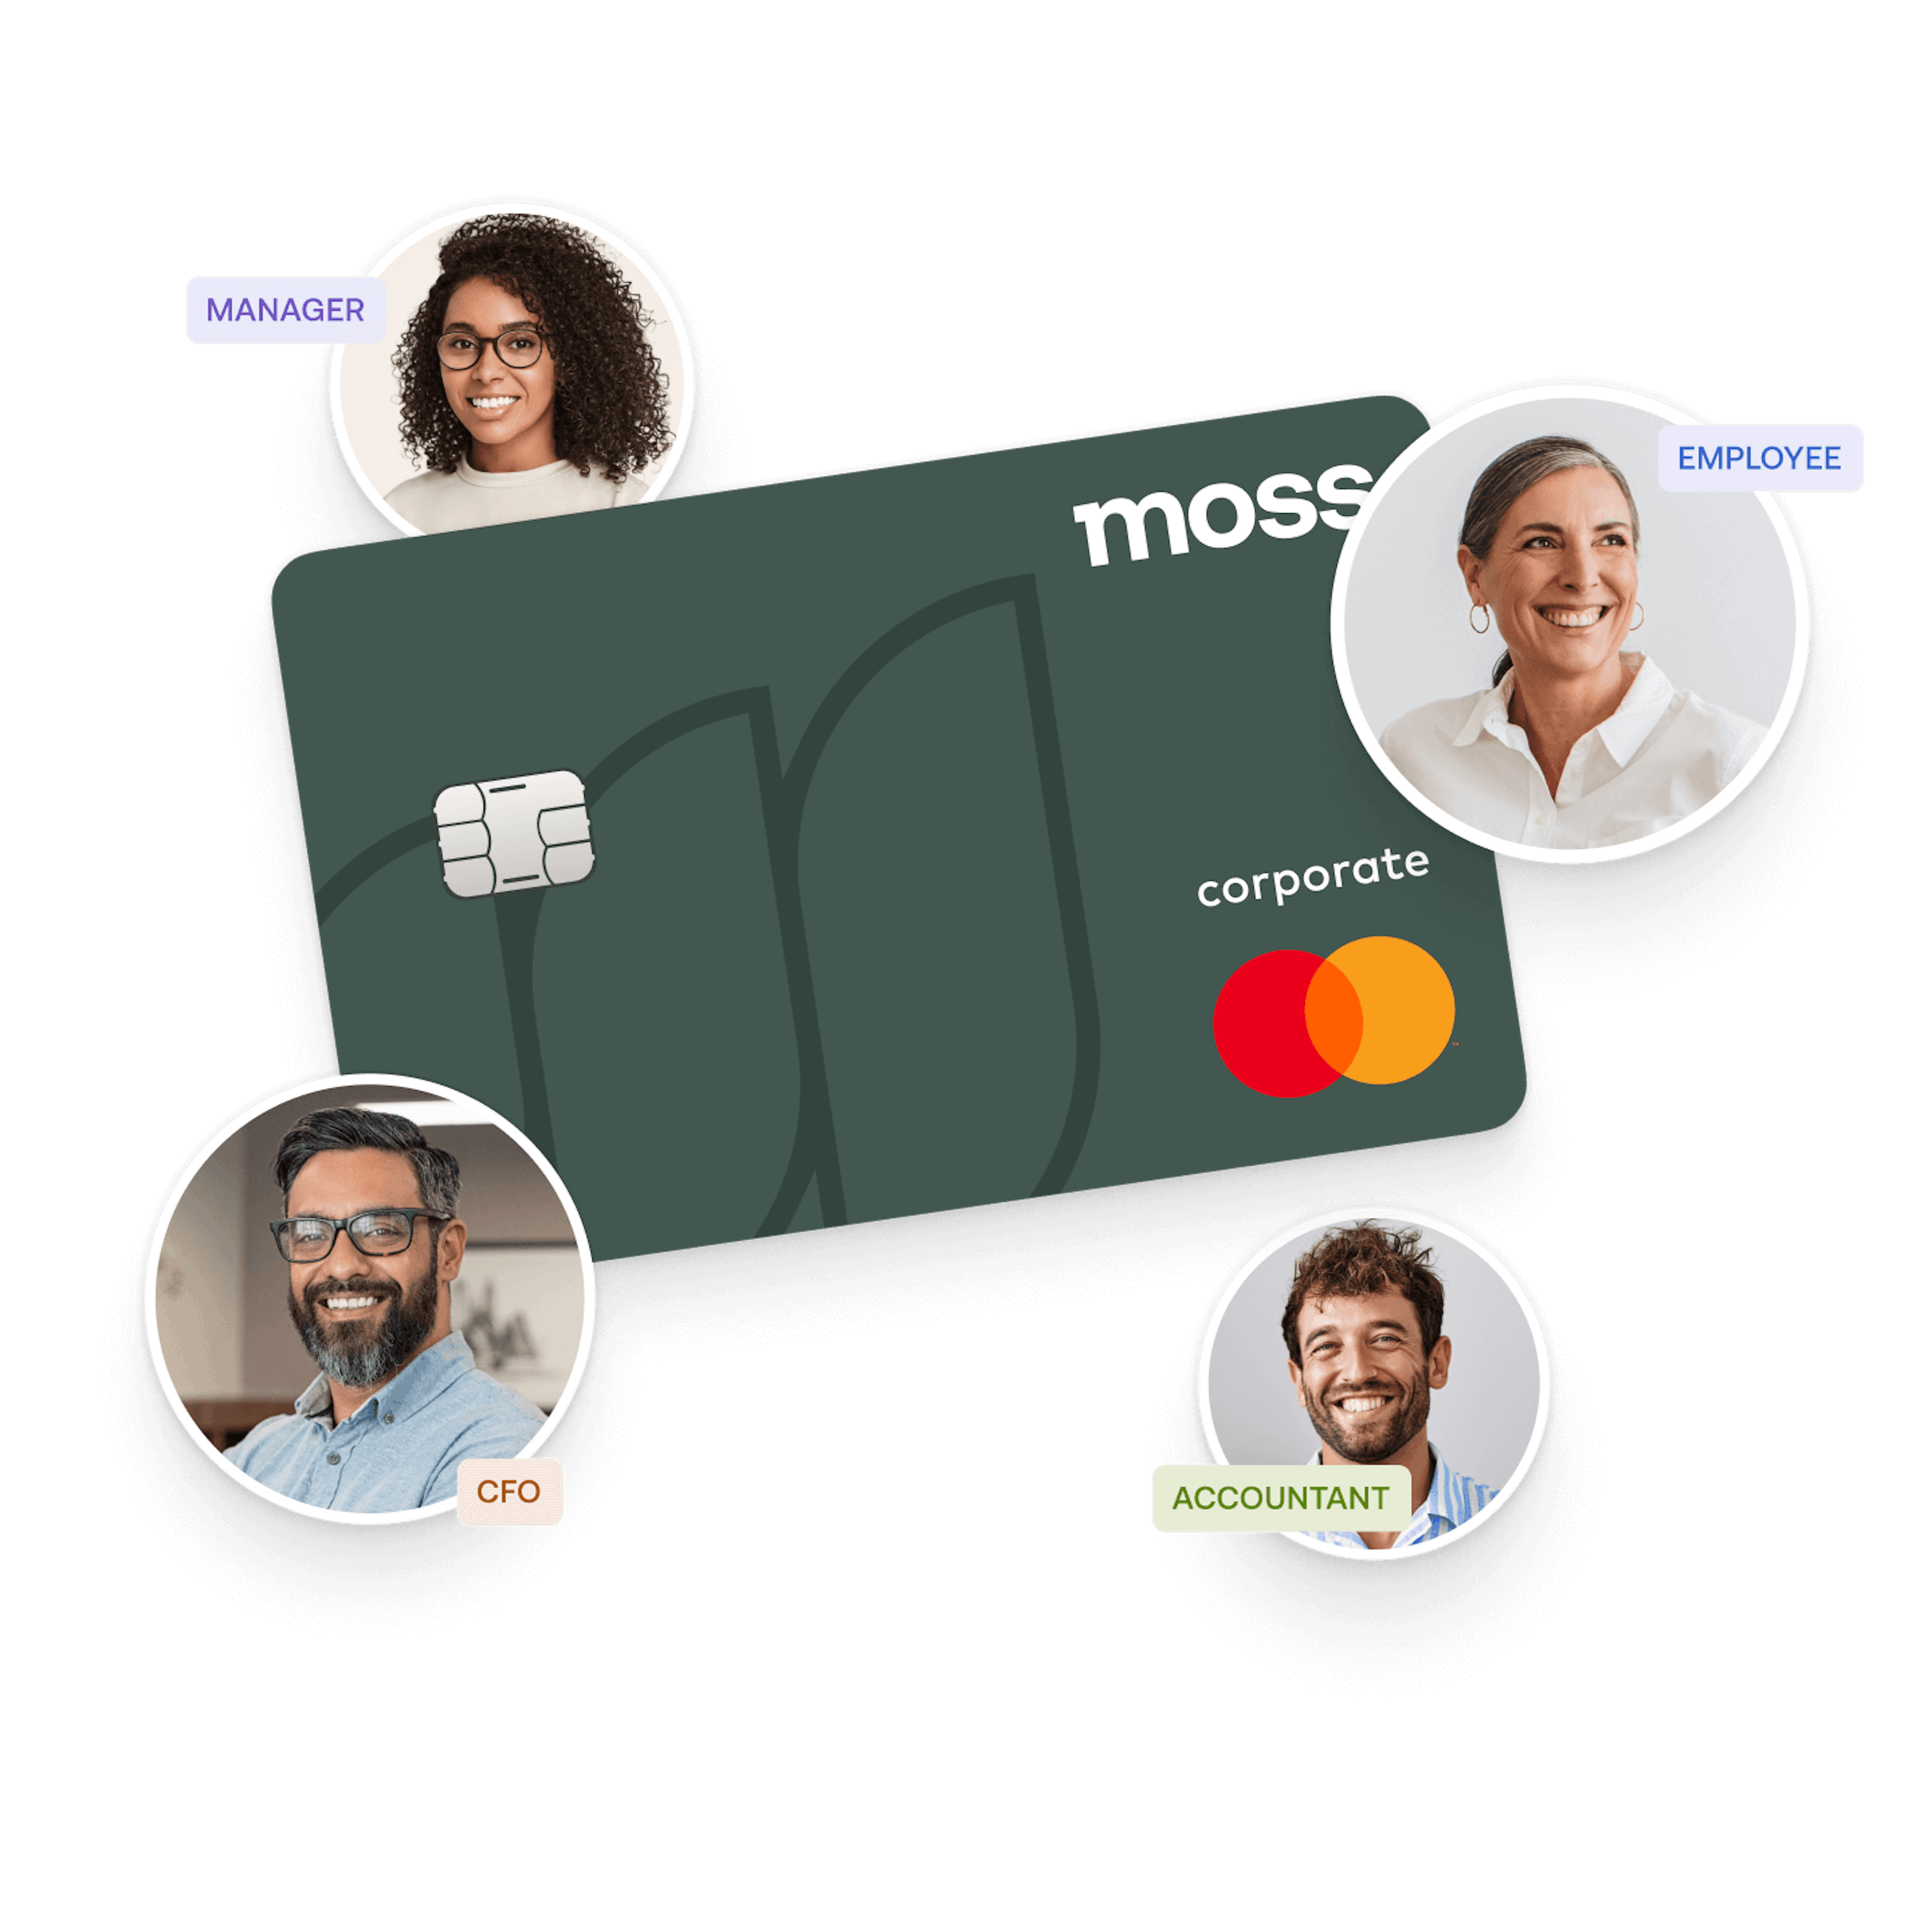 Corporate Credit Cards from Moss